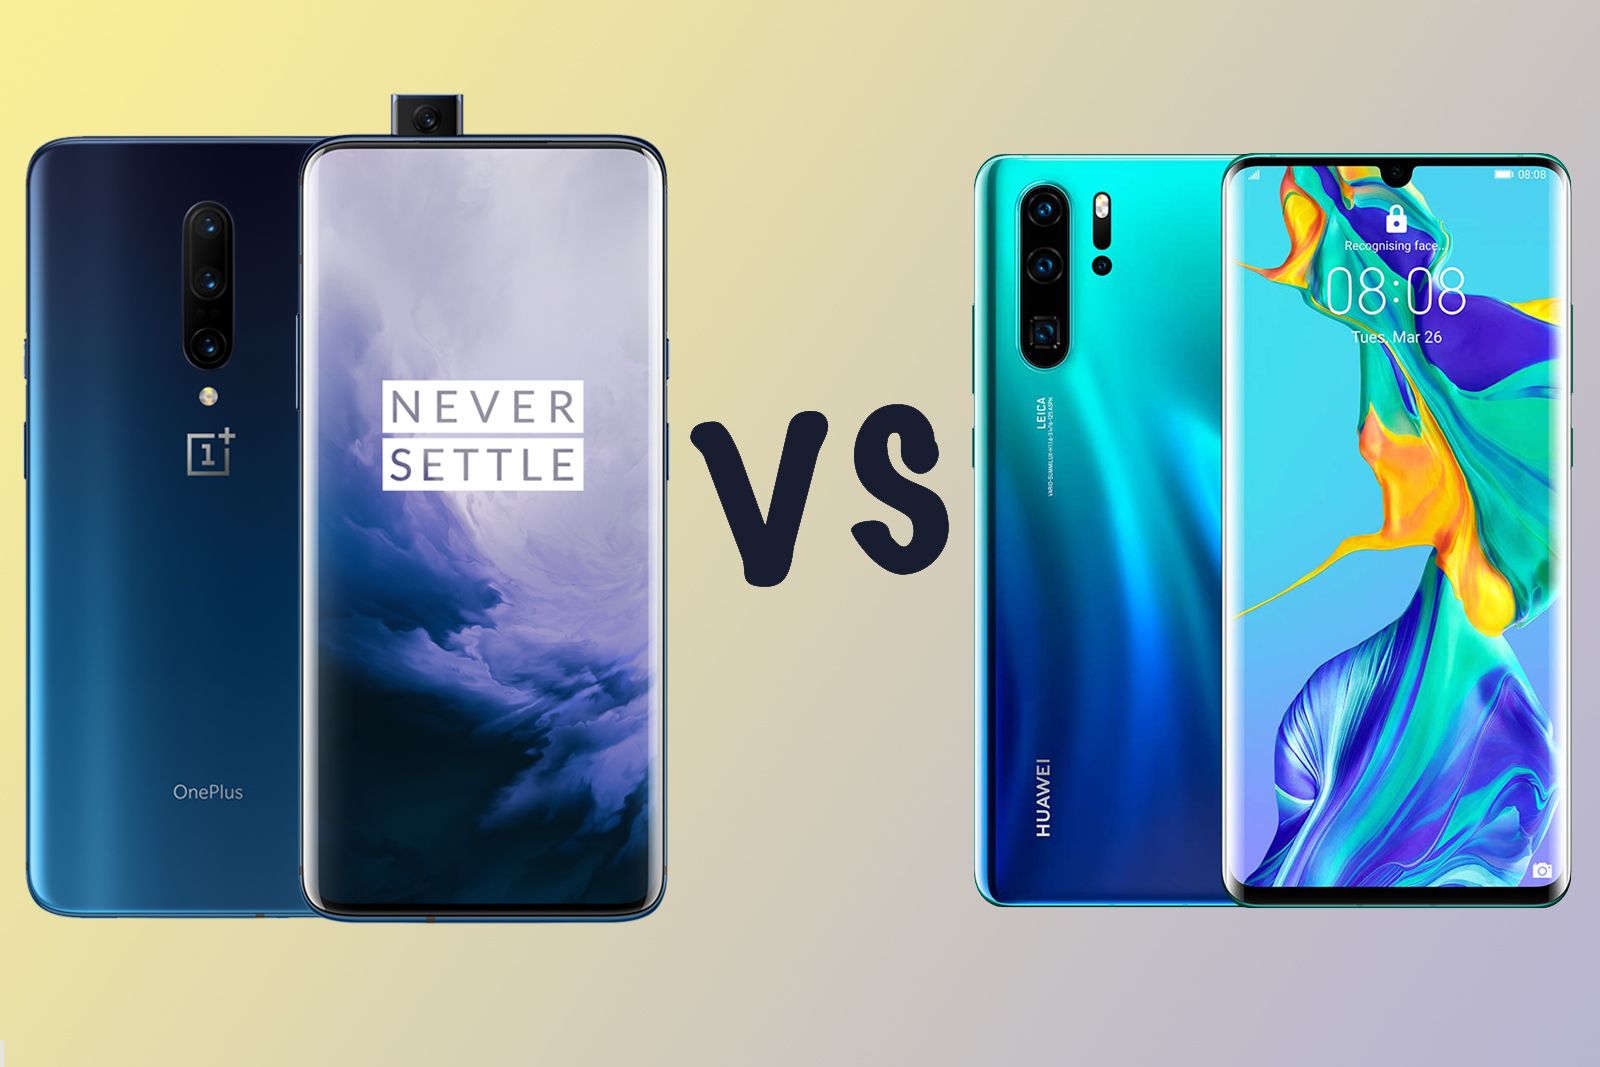 Oneplus 7 Pro Vs Huawei P30 Pro Differences Compared image 1